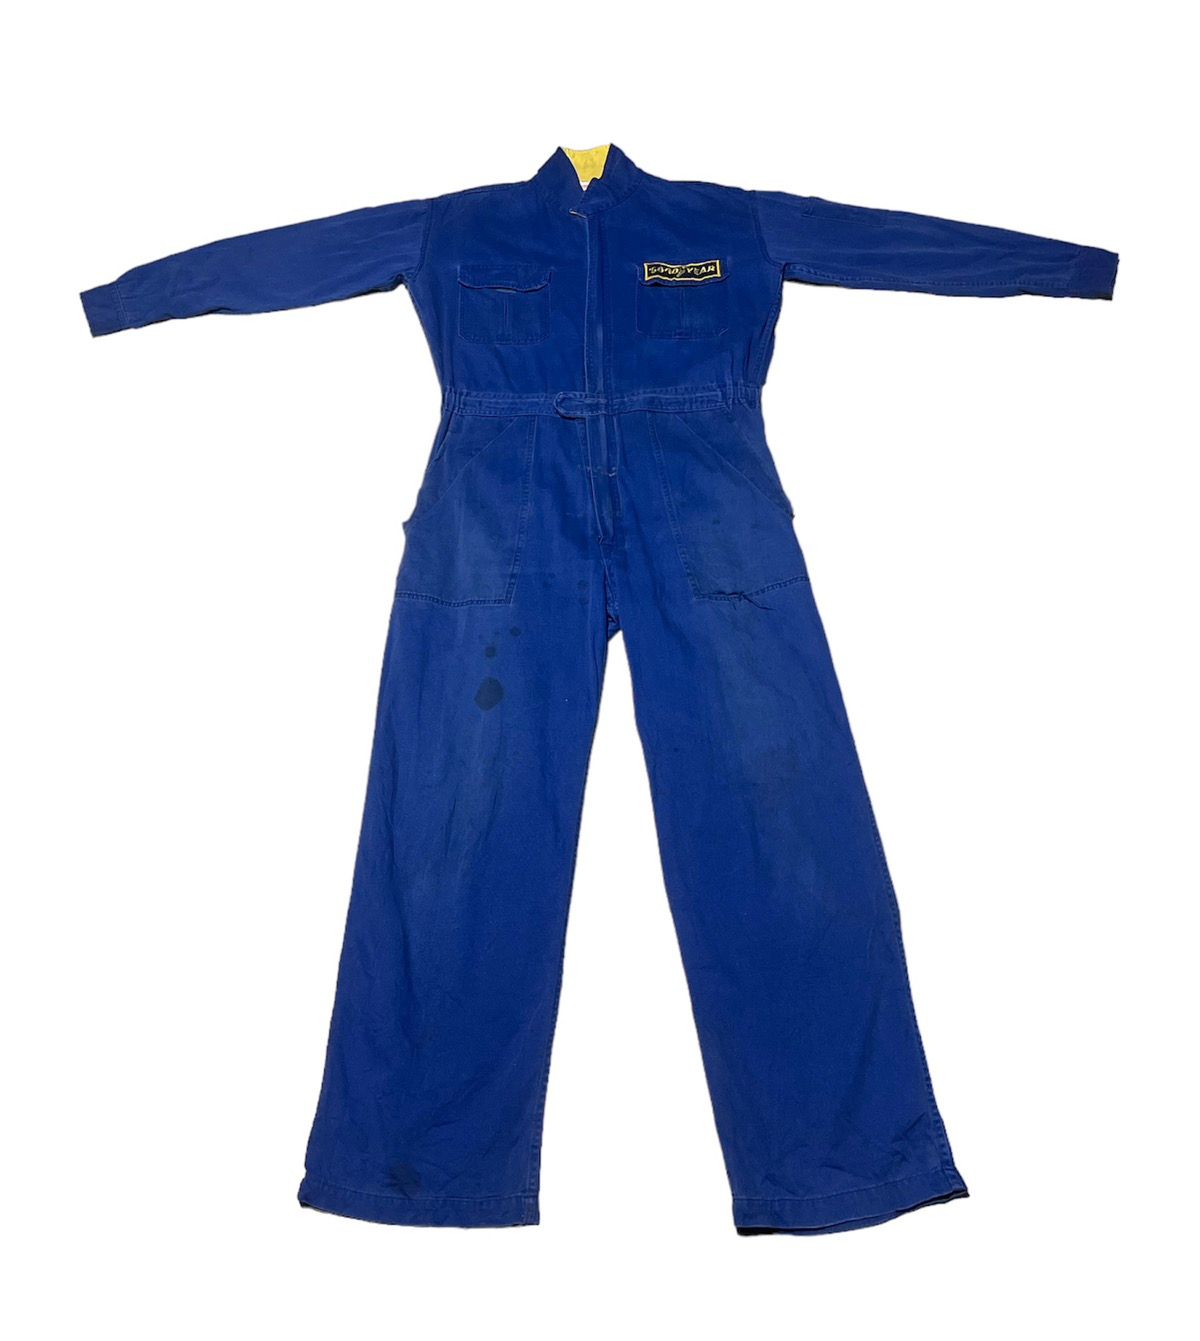 VINTAGE GOOD YEAR RACING OVERALL JUMPSUIT - 2